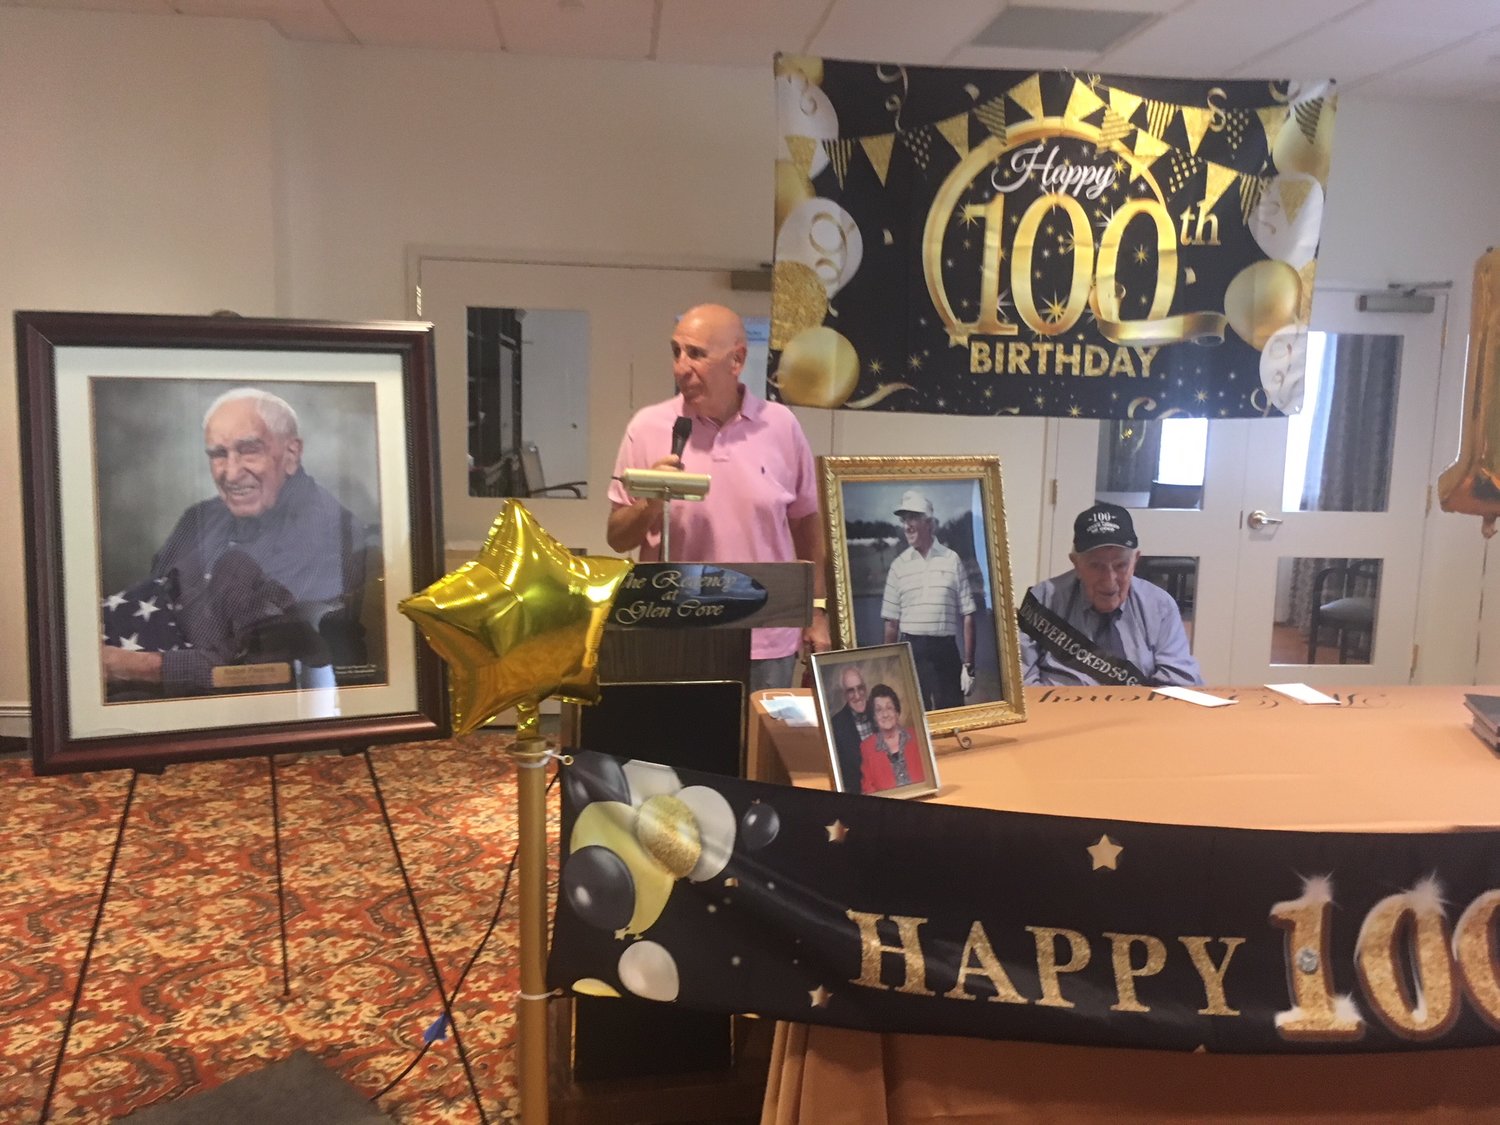 Ralph Panetta Jr. thanked the Regency staff for hosting a 100th birthday celebration for his father, Ralph Panetta.